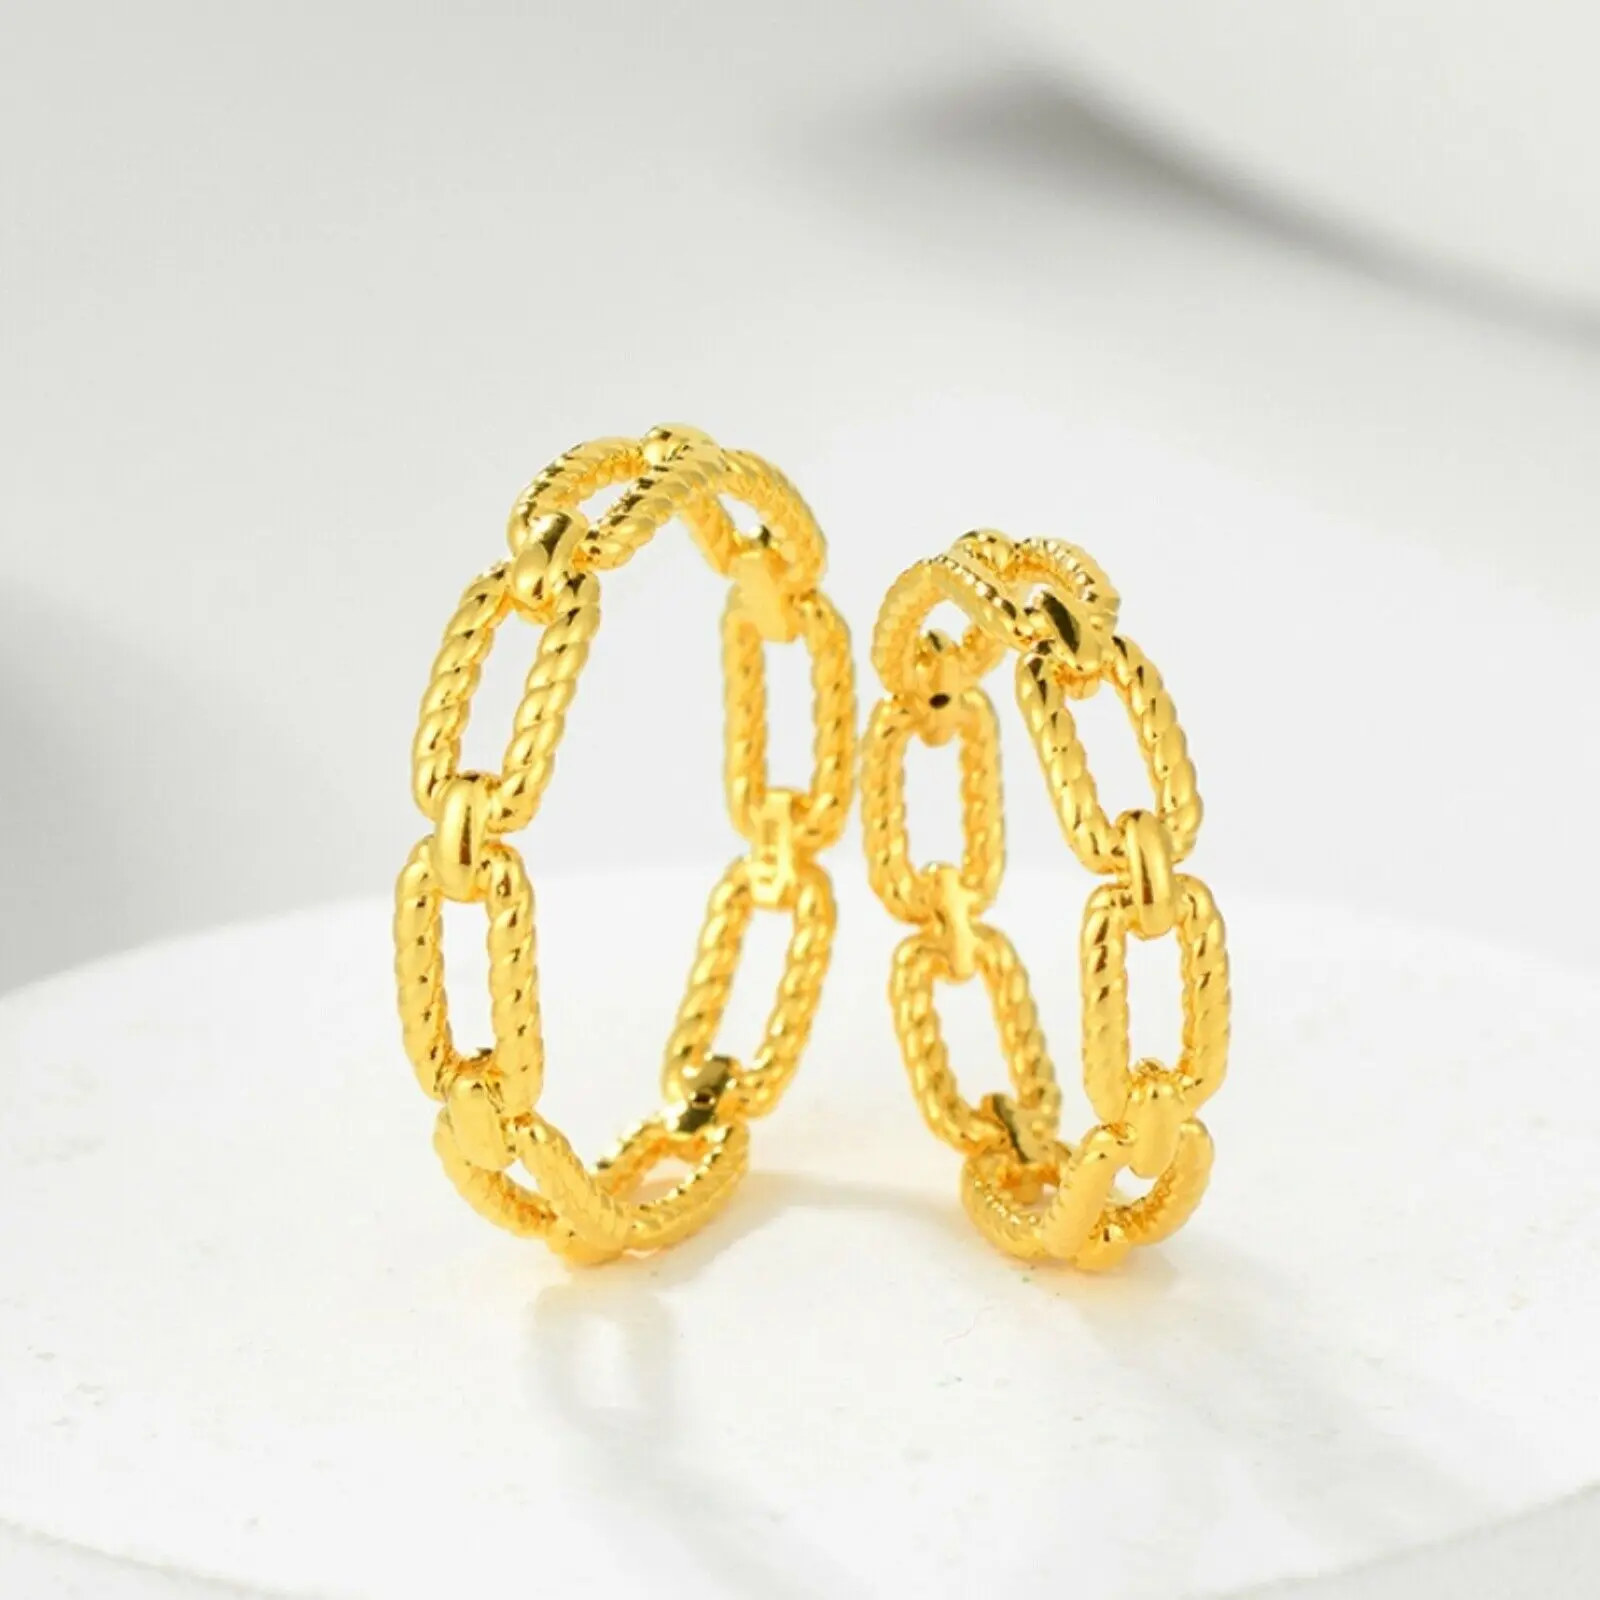 

Pure Gold Ring Band For Women Real 24K Yellow Gold 3D Hard Gold 5G Light Design Weave Design Lover Rings US 4-7.5